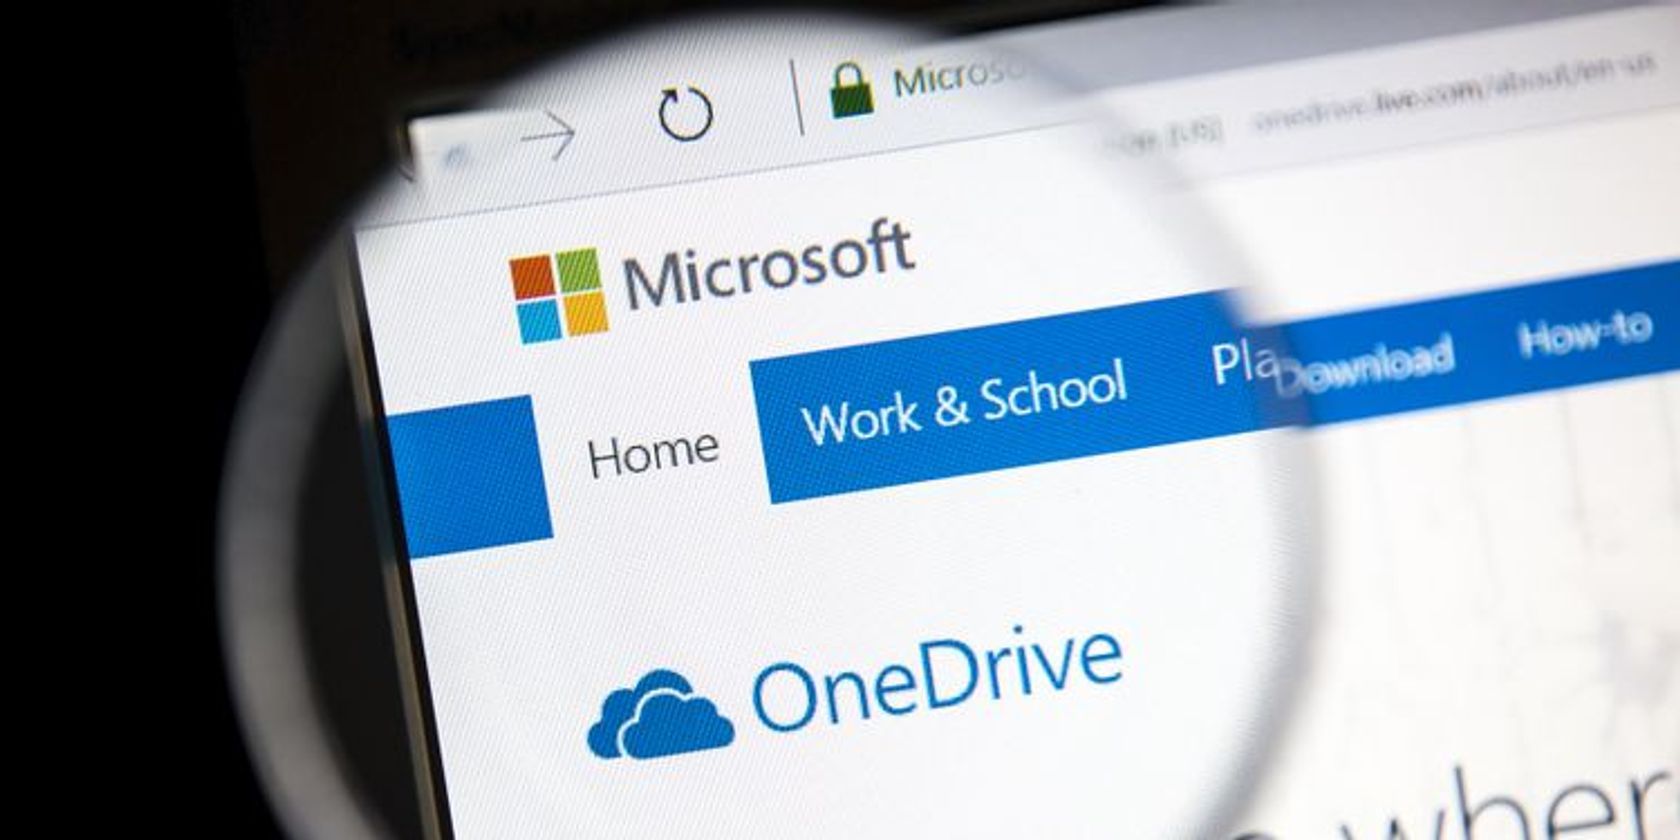 Use OneDrive for School Assignments